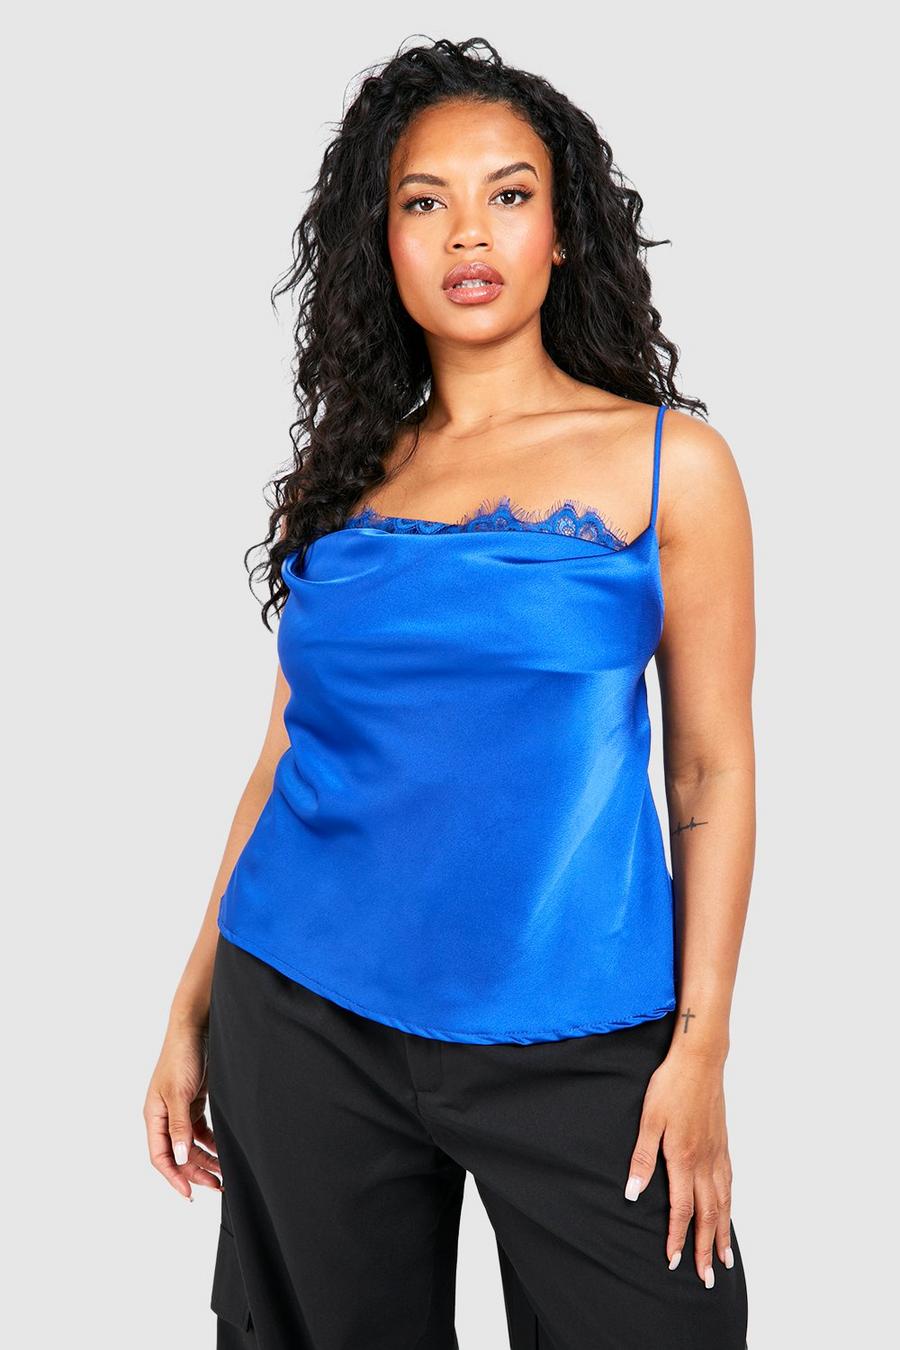 HSMQHJWE Cropped Tank Tops For Women With Built In Bra 3Xl Womens Silk  Satin Camisole Solid Color Camisole Top T Shirt Shirt Tank Top V Neck  Spaghetti